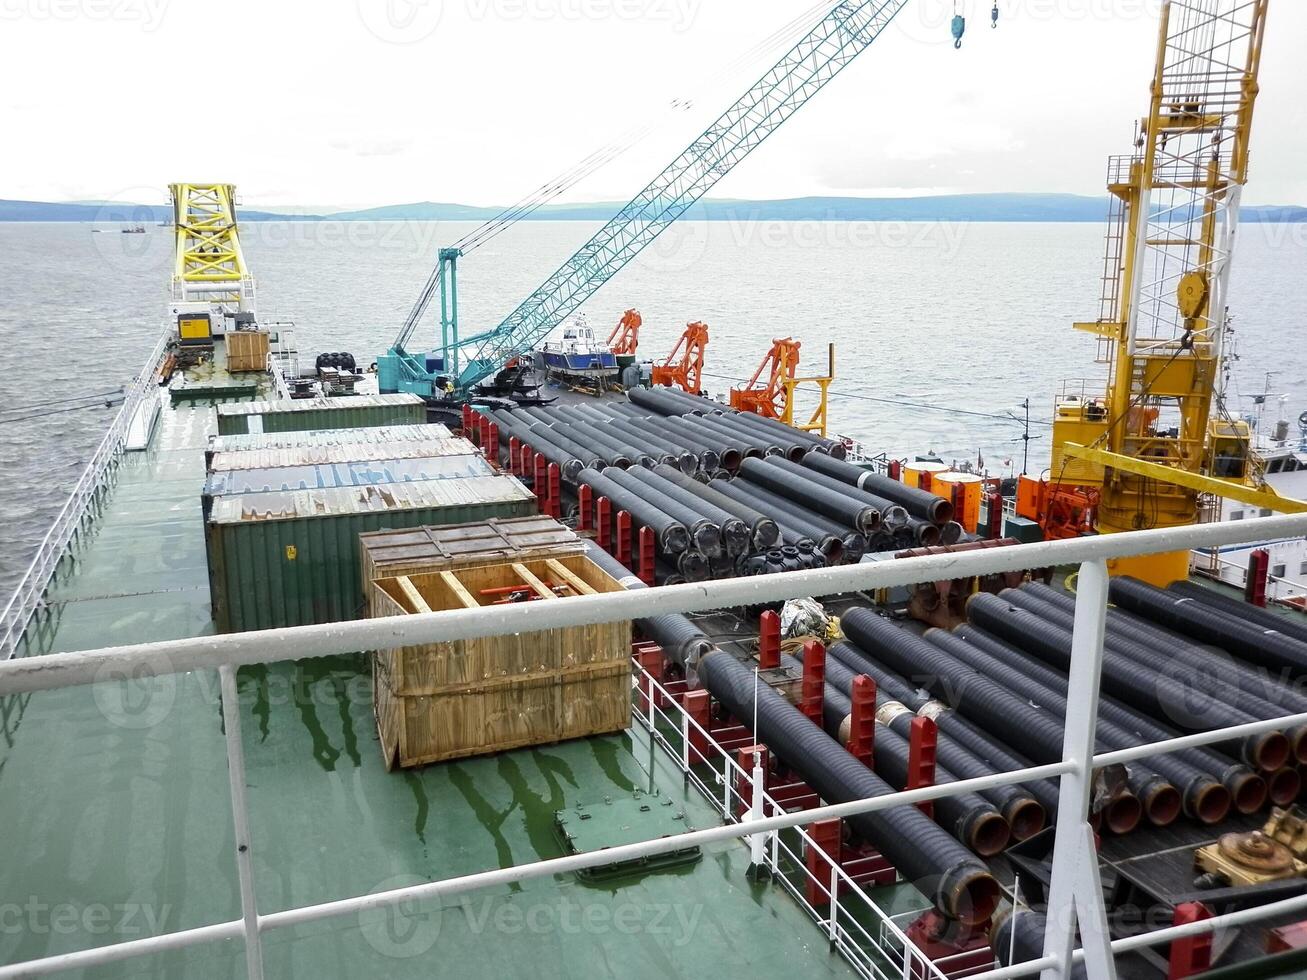 The deck lay barge. Pipes and Lifting cranes on the ship. Equipment for laying a pipeline on the seabed photo